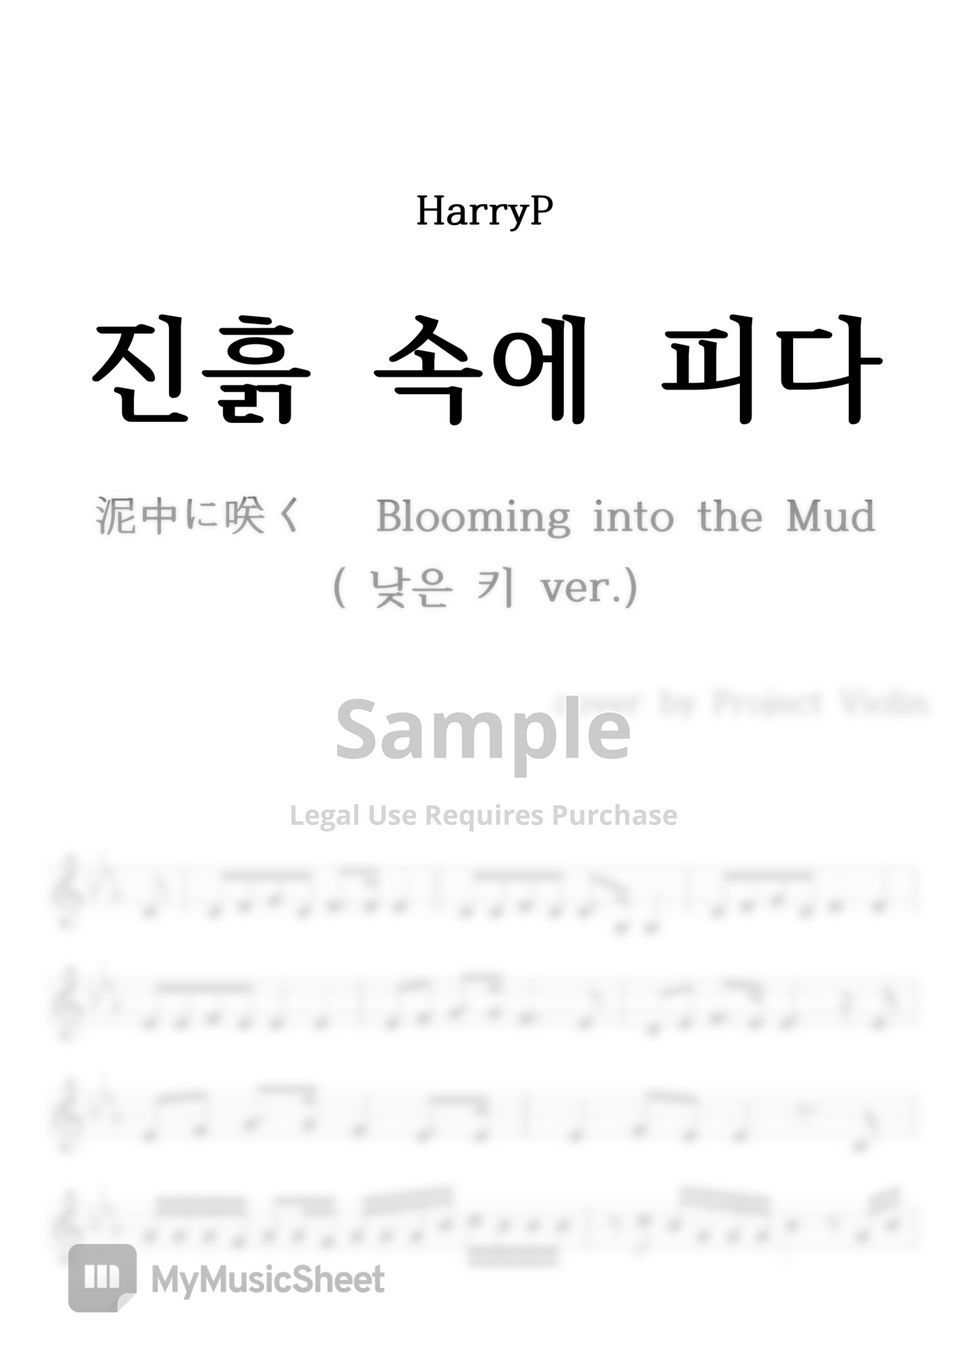 HarryP - 진흙 속에 피다(泥中に咲く Blooming into the Mud) by Project Violin